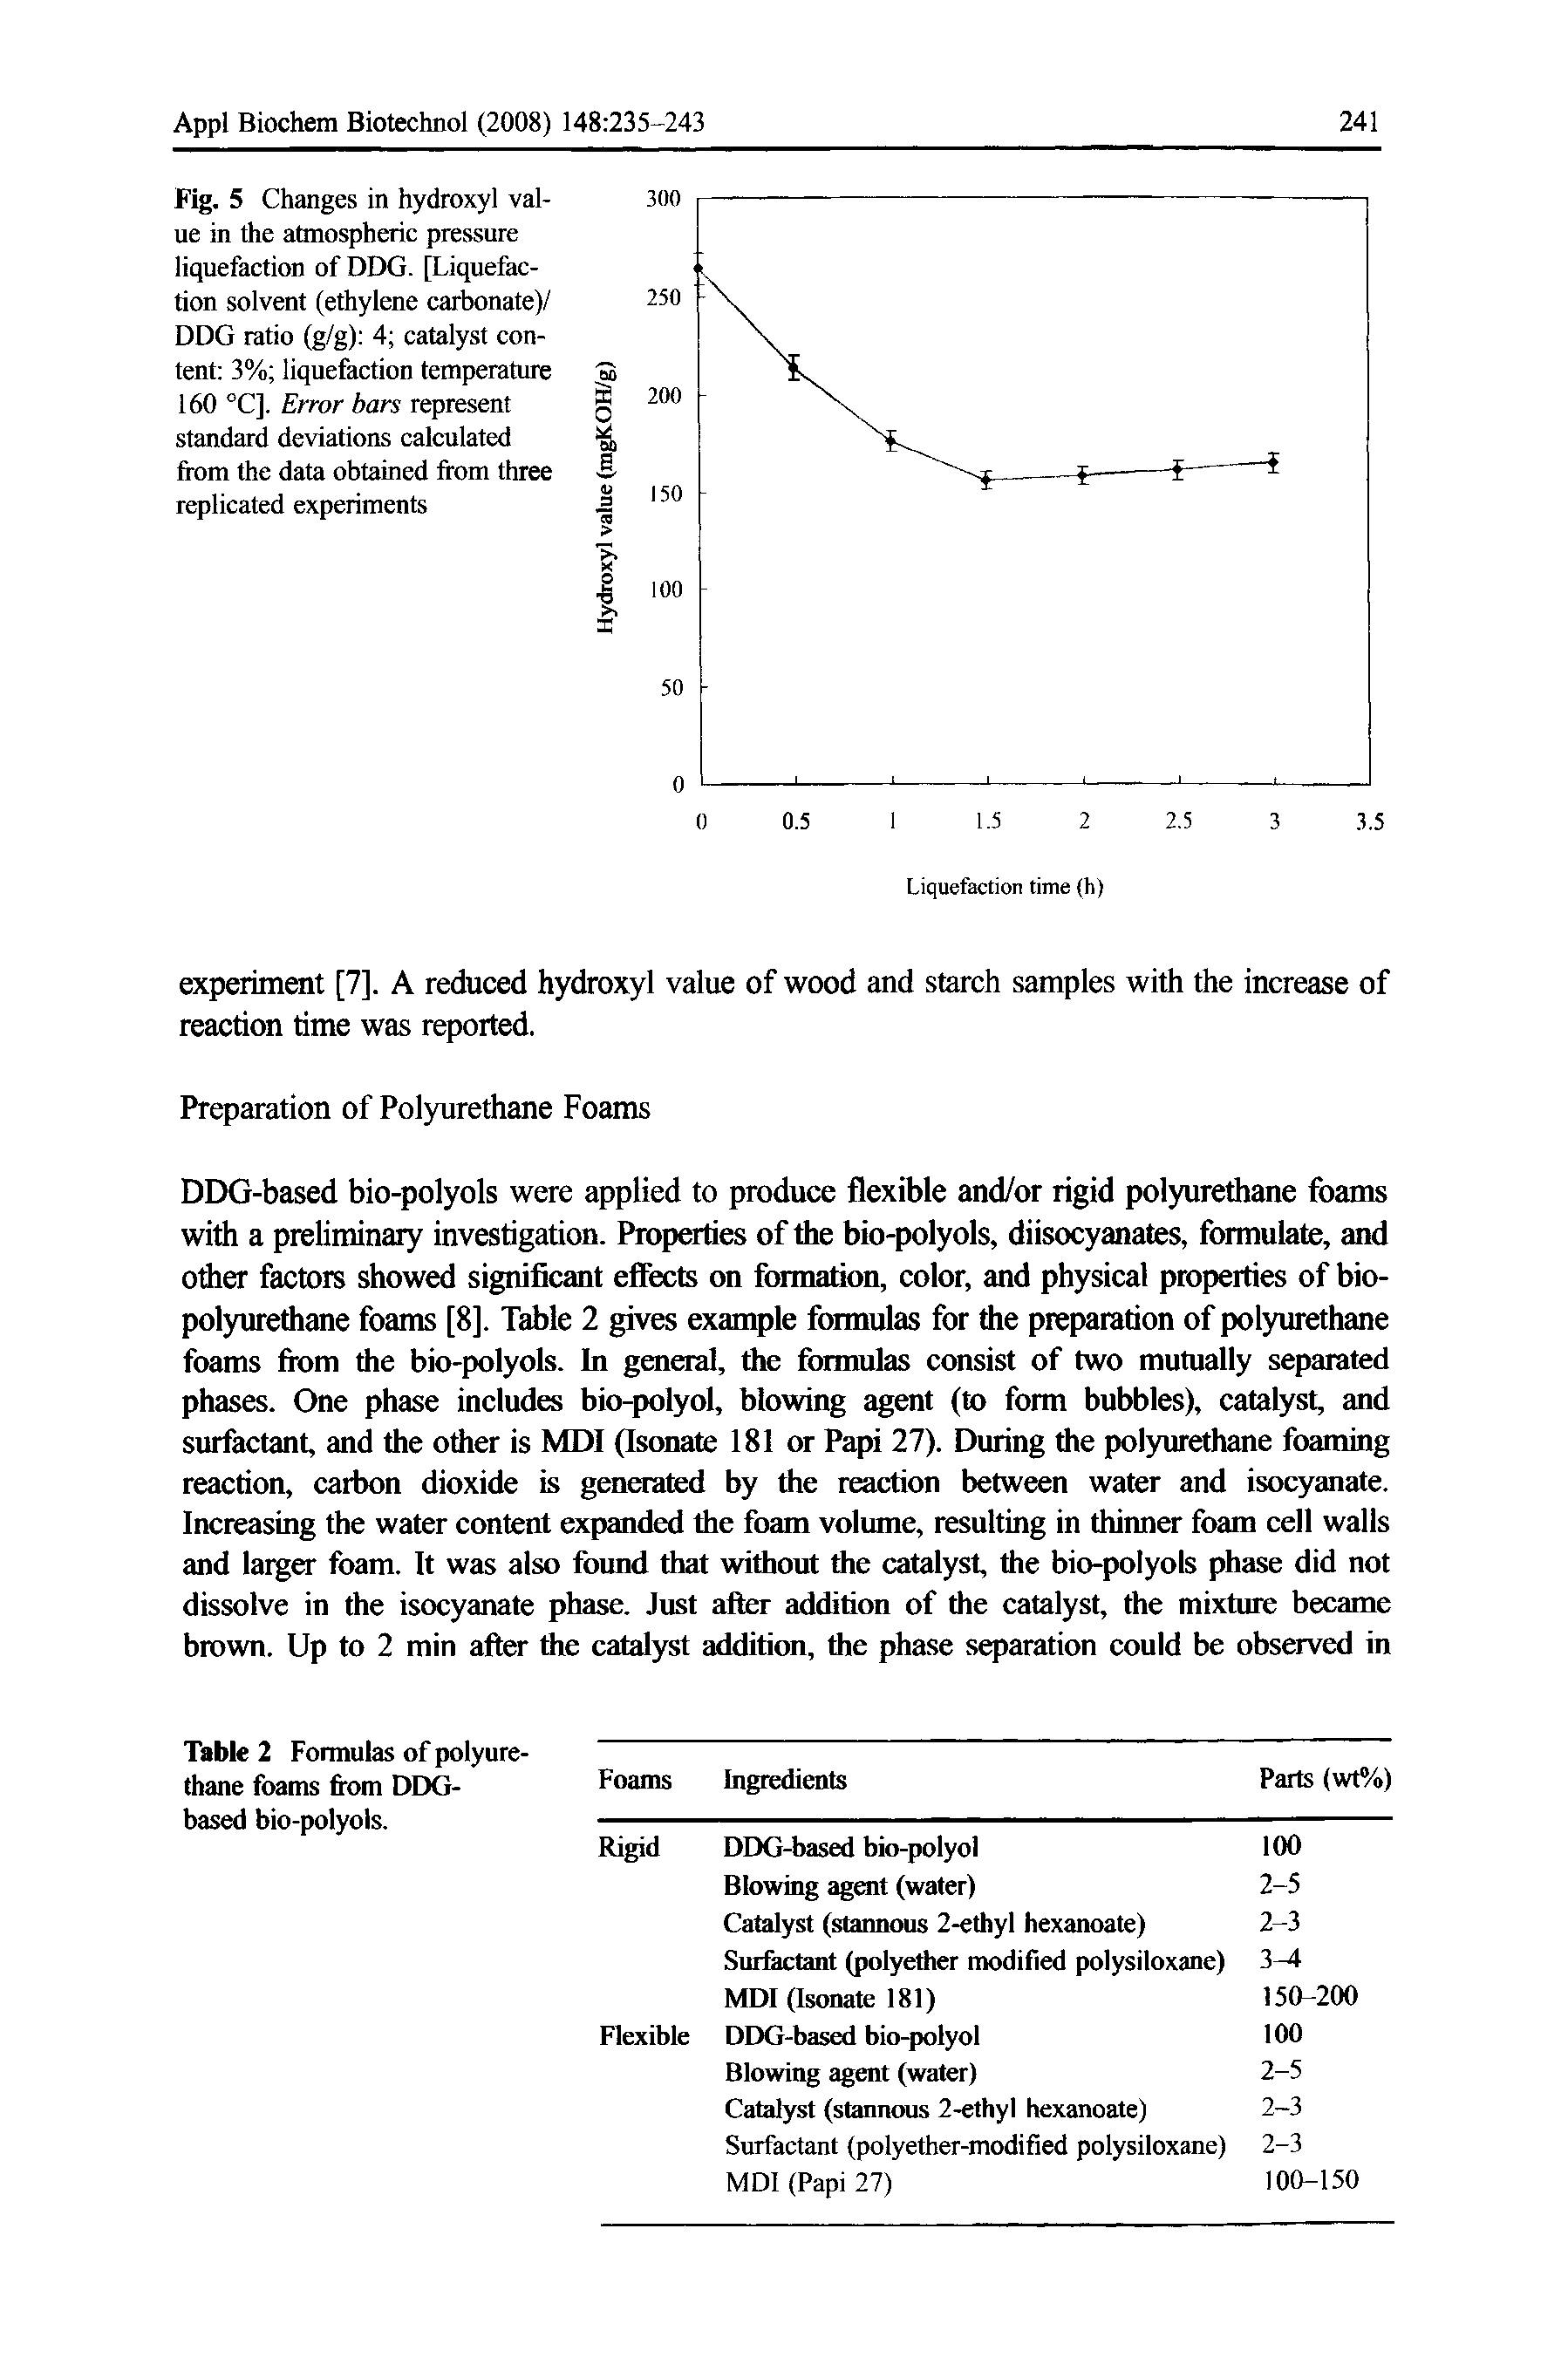 Fig. 5 Changes in hydroxyl value in the atmospheric pressure liquefaction of DDG. [Liquefaction solvent (ethylene carbonate)/ DDG ratio (g/g) 4 catalyst content 3% liquefaction temperature 160 °C]. Error bars represent standard deviations calculated from the data obtained from three replicated experiments...